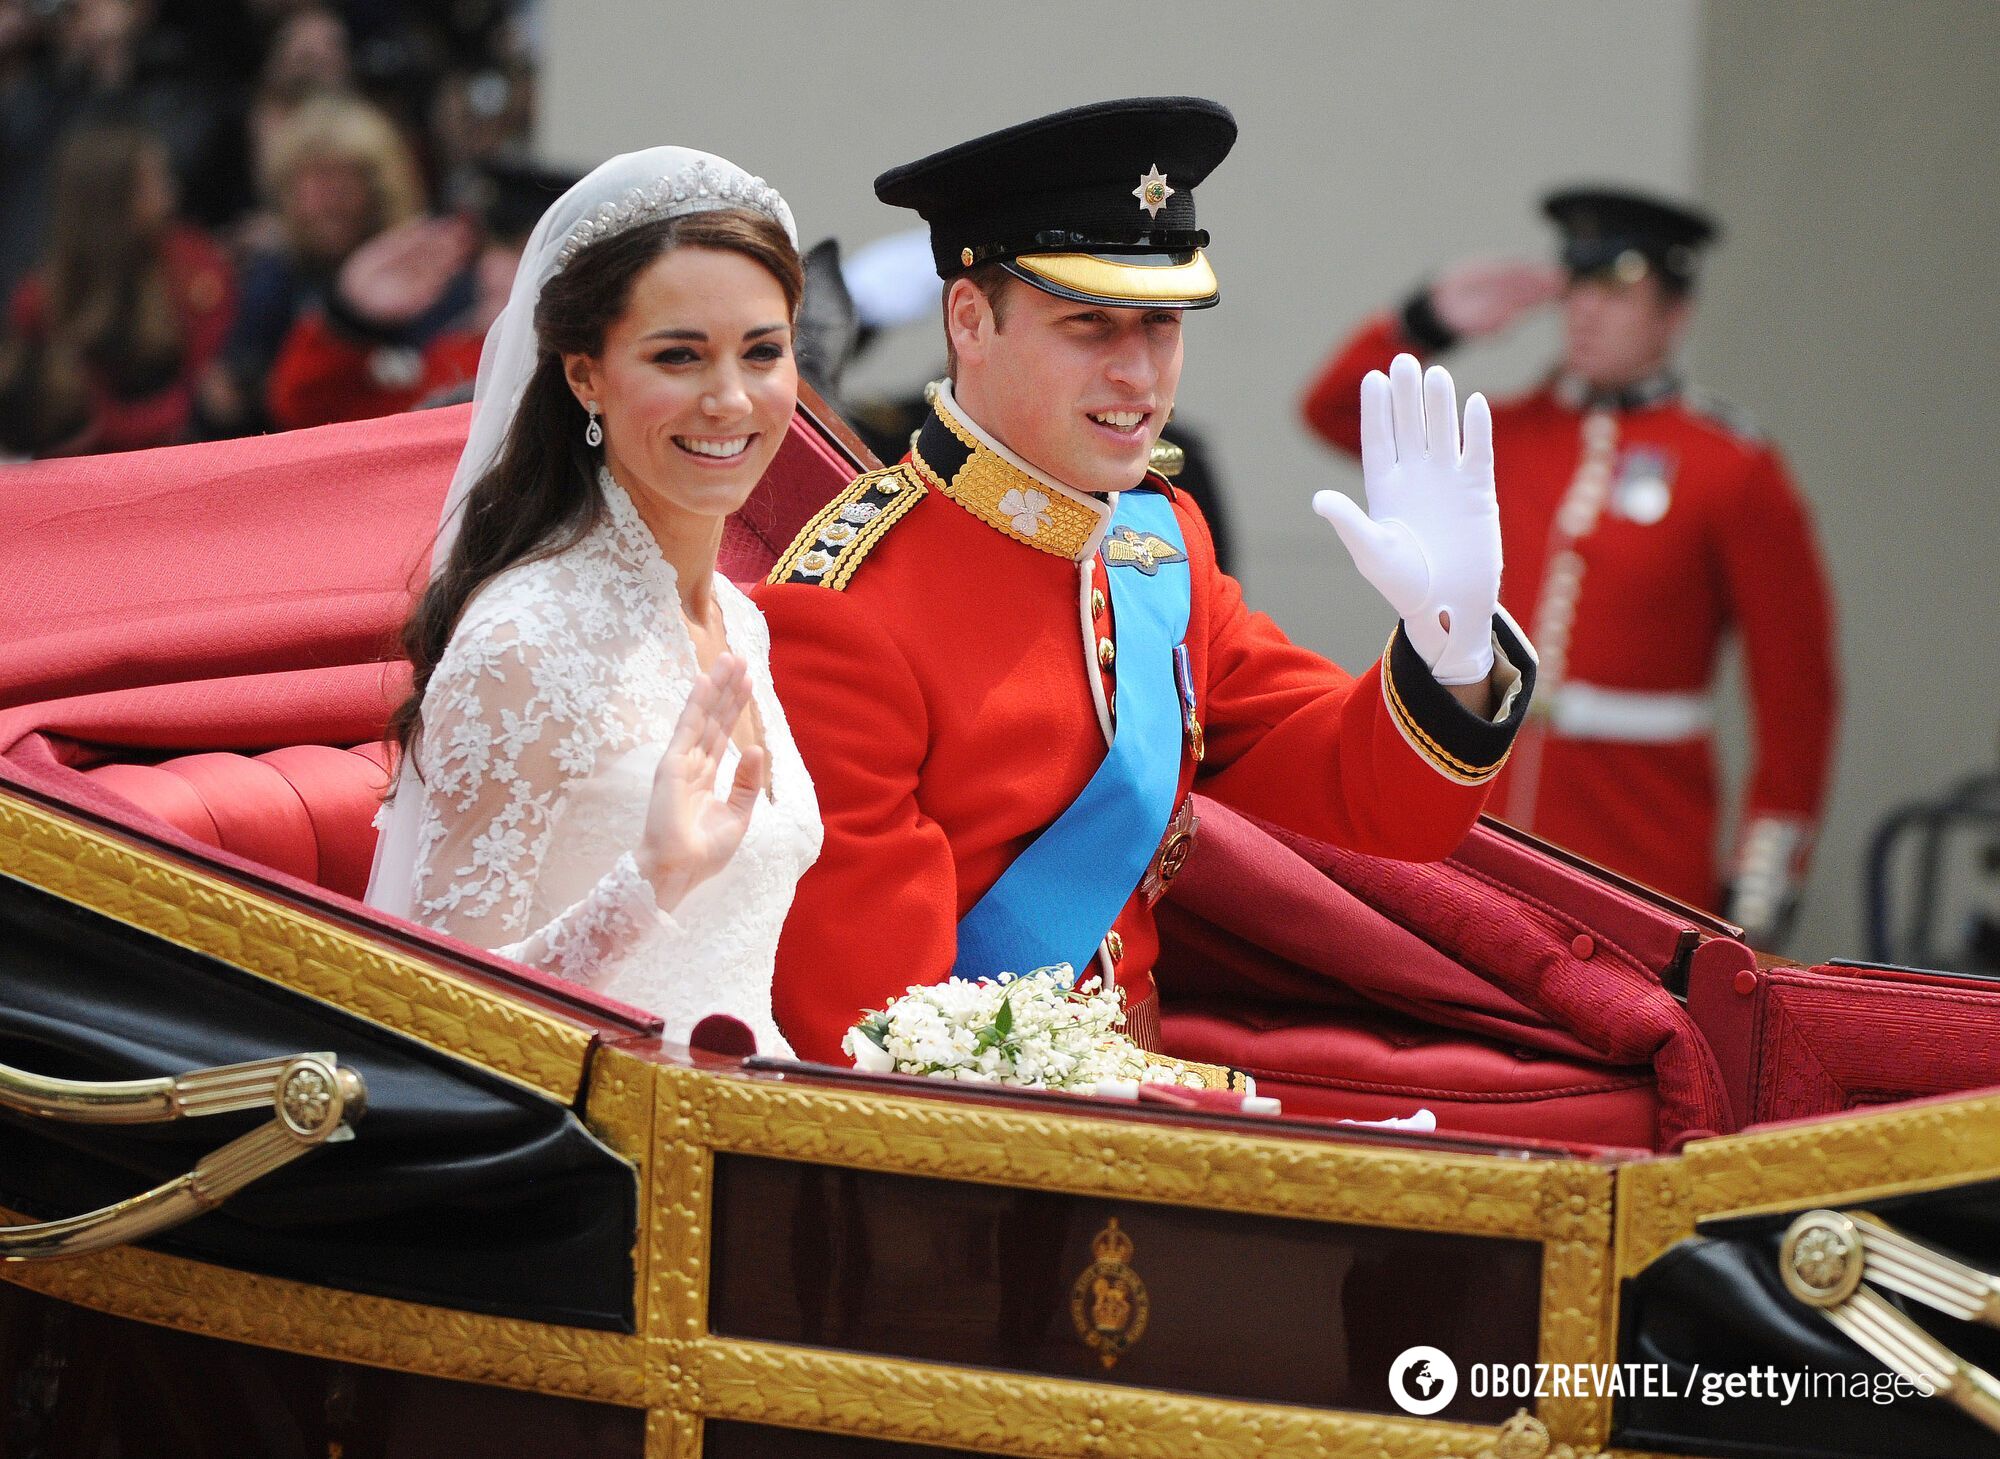 It became known which royal protocol Elizabeth II violated at the wedding of Prince William and Kate Middleton: but she is not to blame